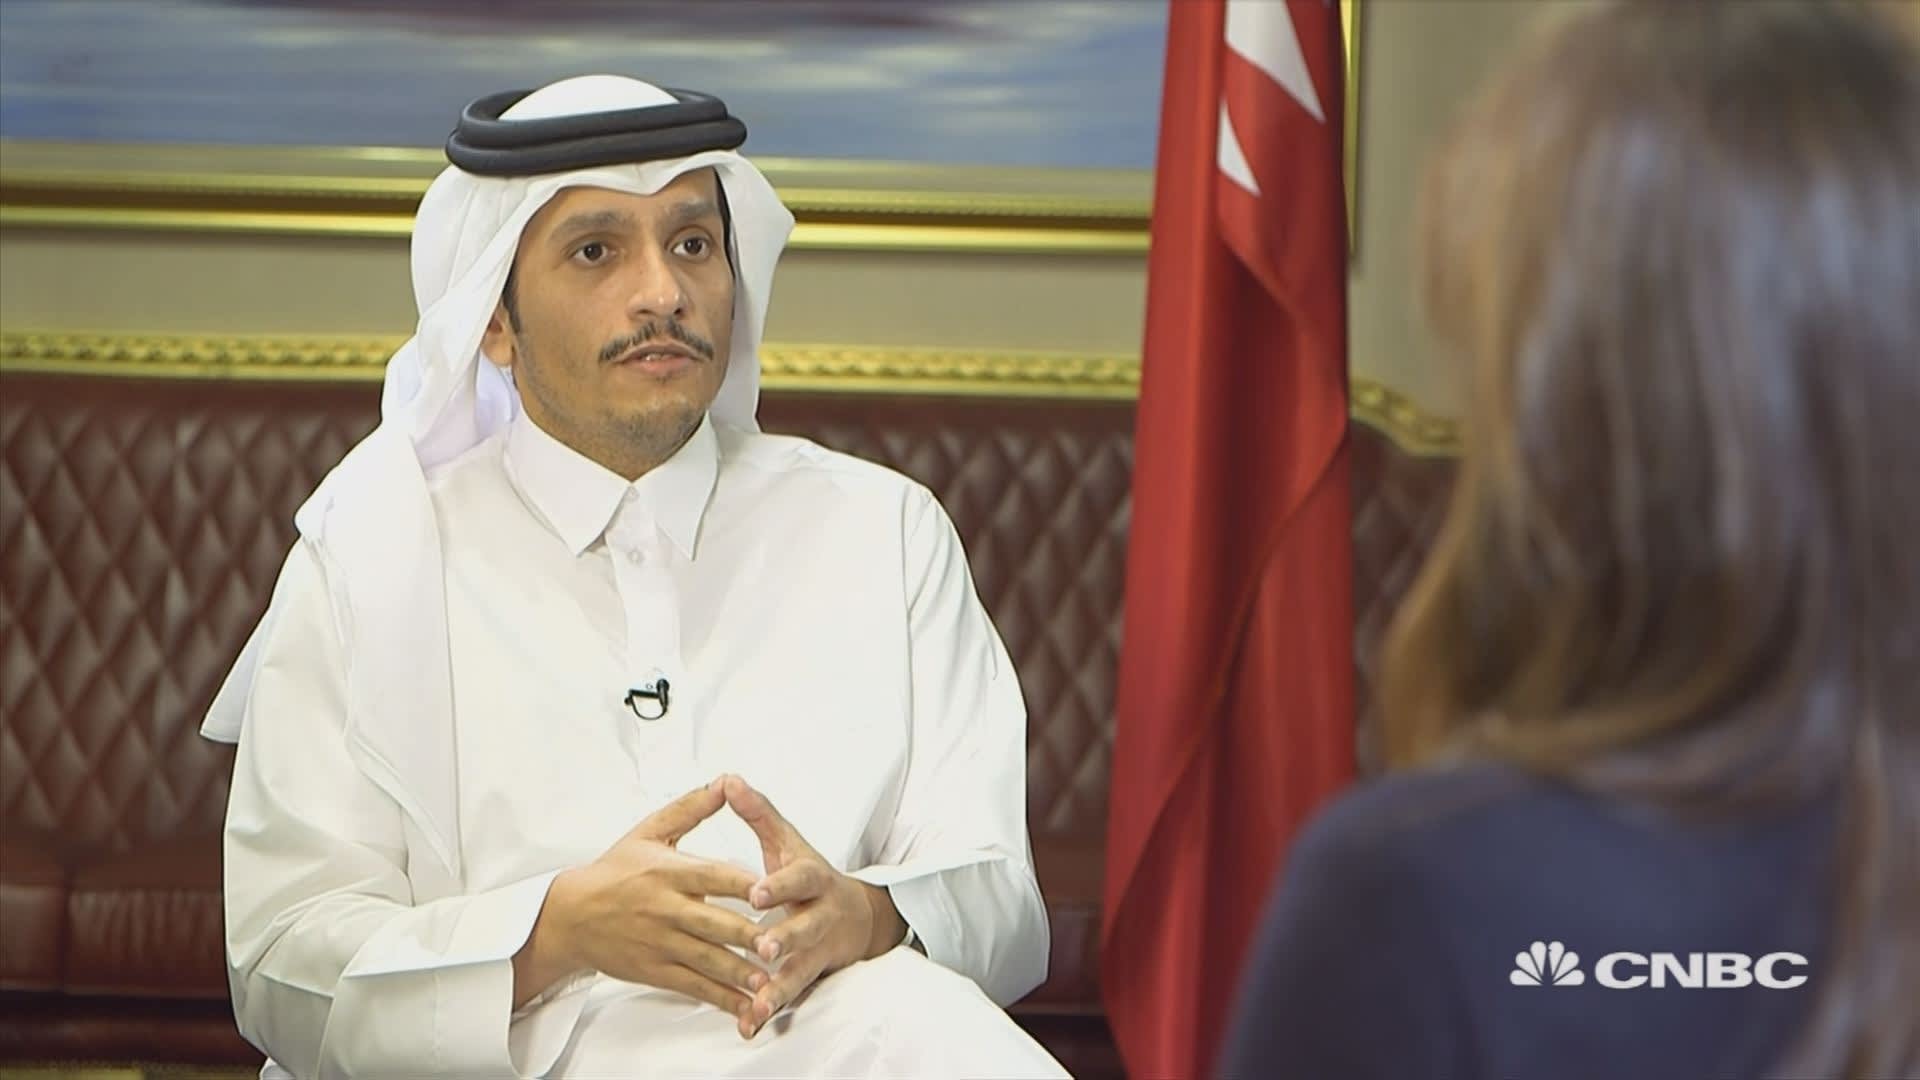 Qatar foreign policy not driven by Al Jazeera, minister says